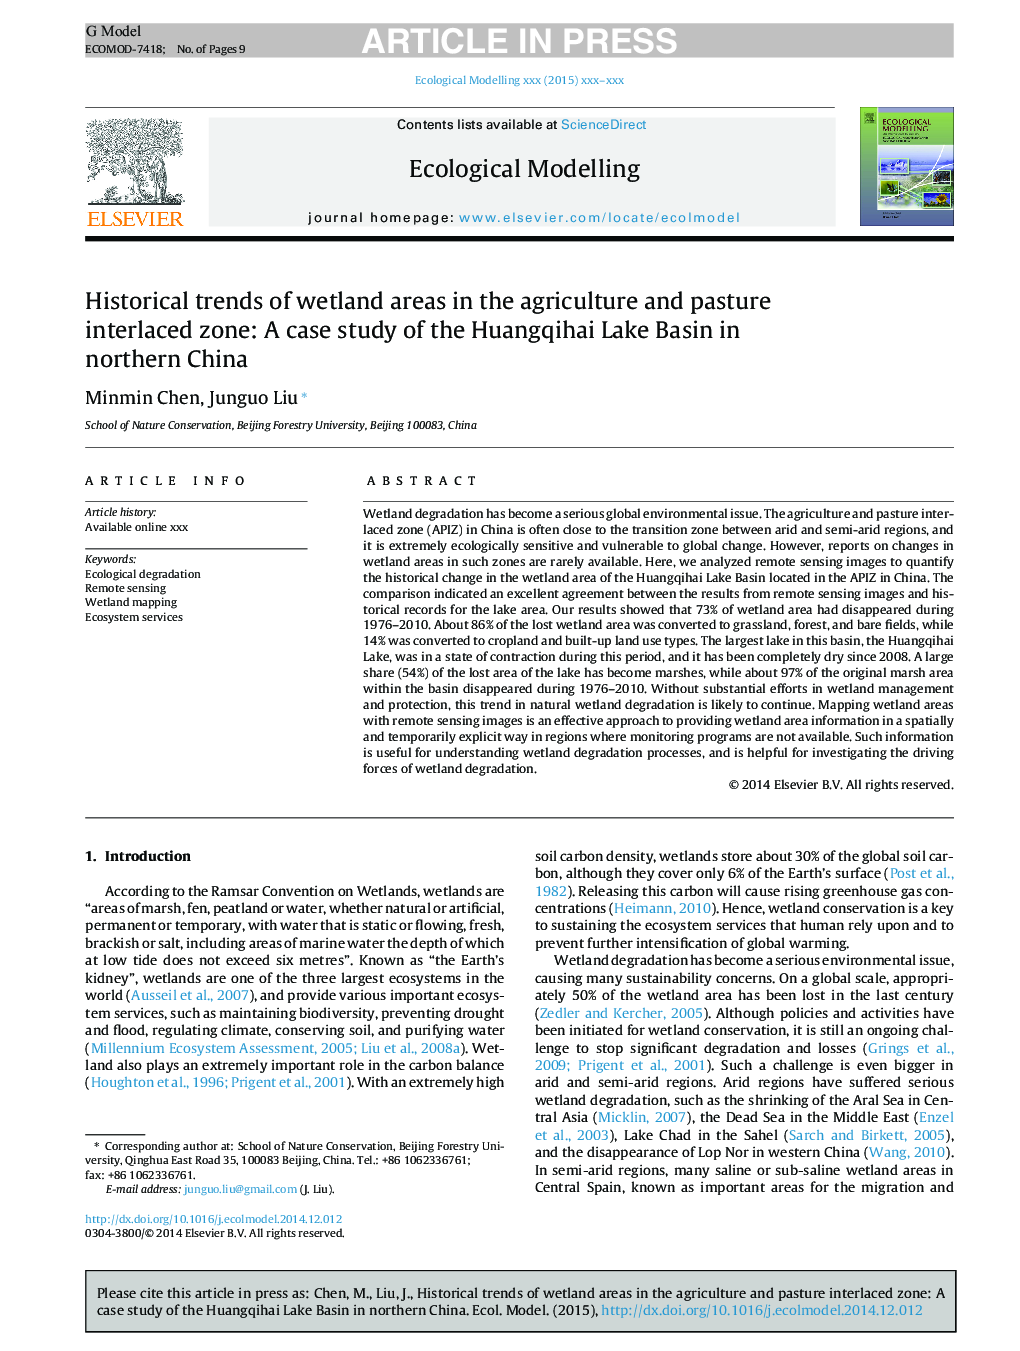 Historical trends of wetland areas in the agriculture and pasture interlaced zone: A case study of the Huangqihai Lake Basin in northern China